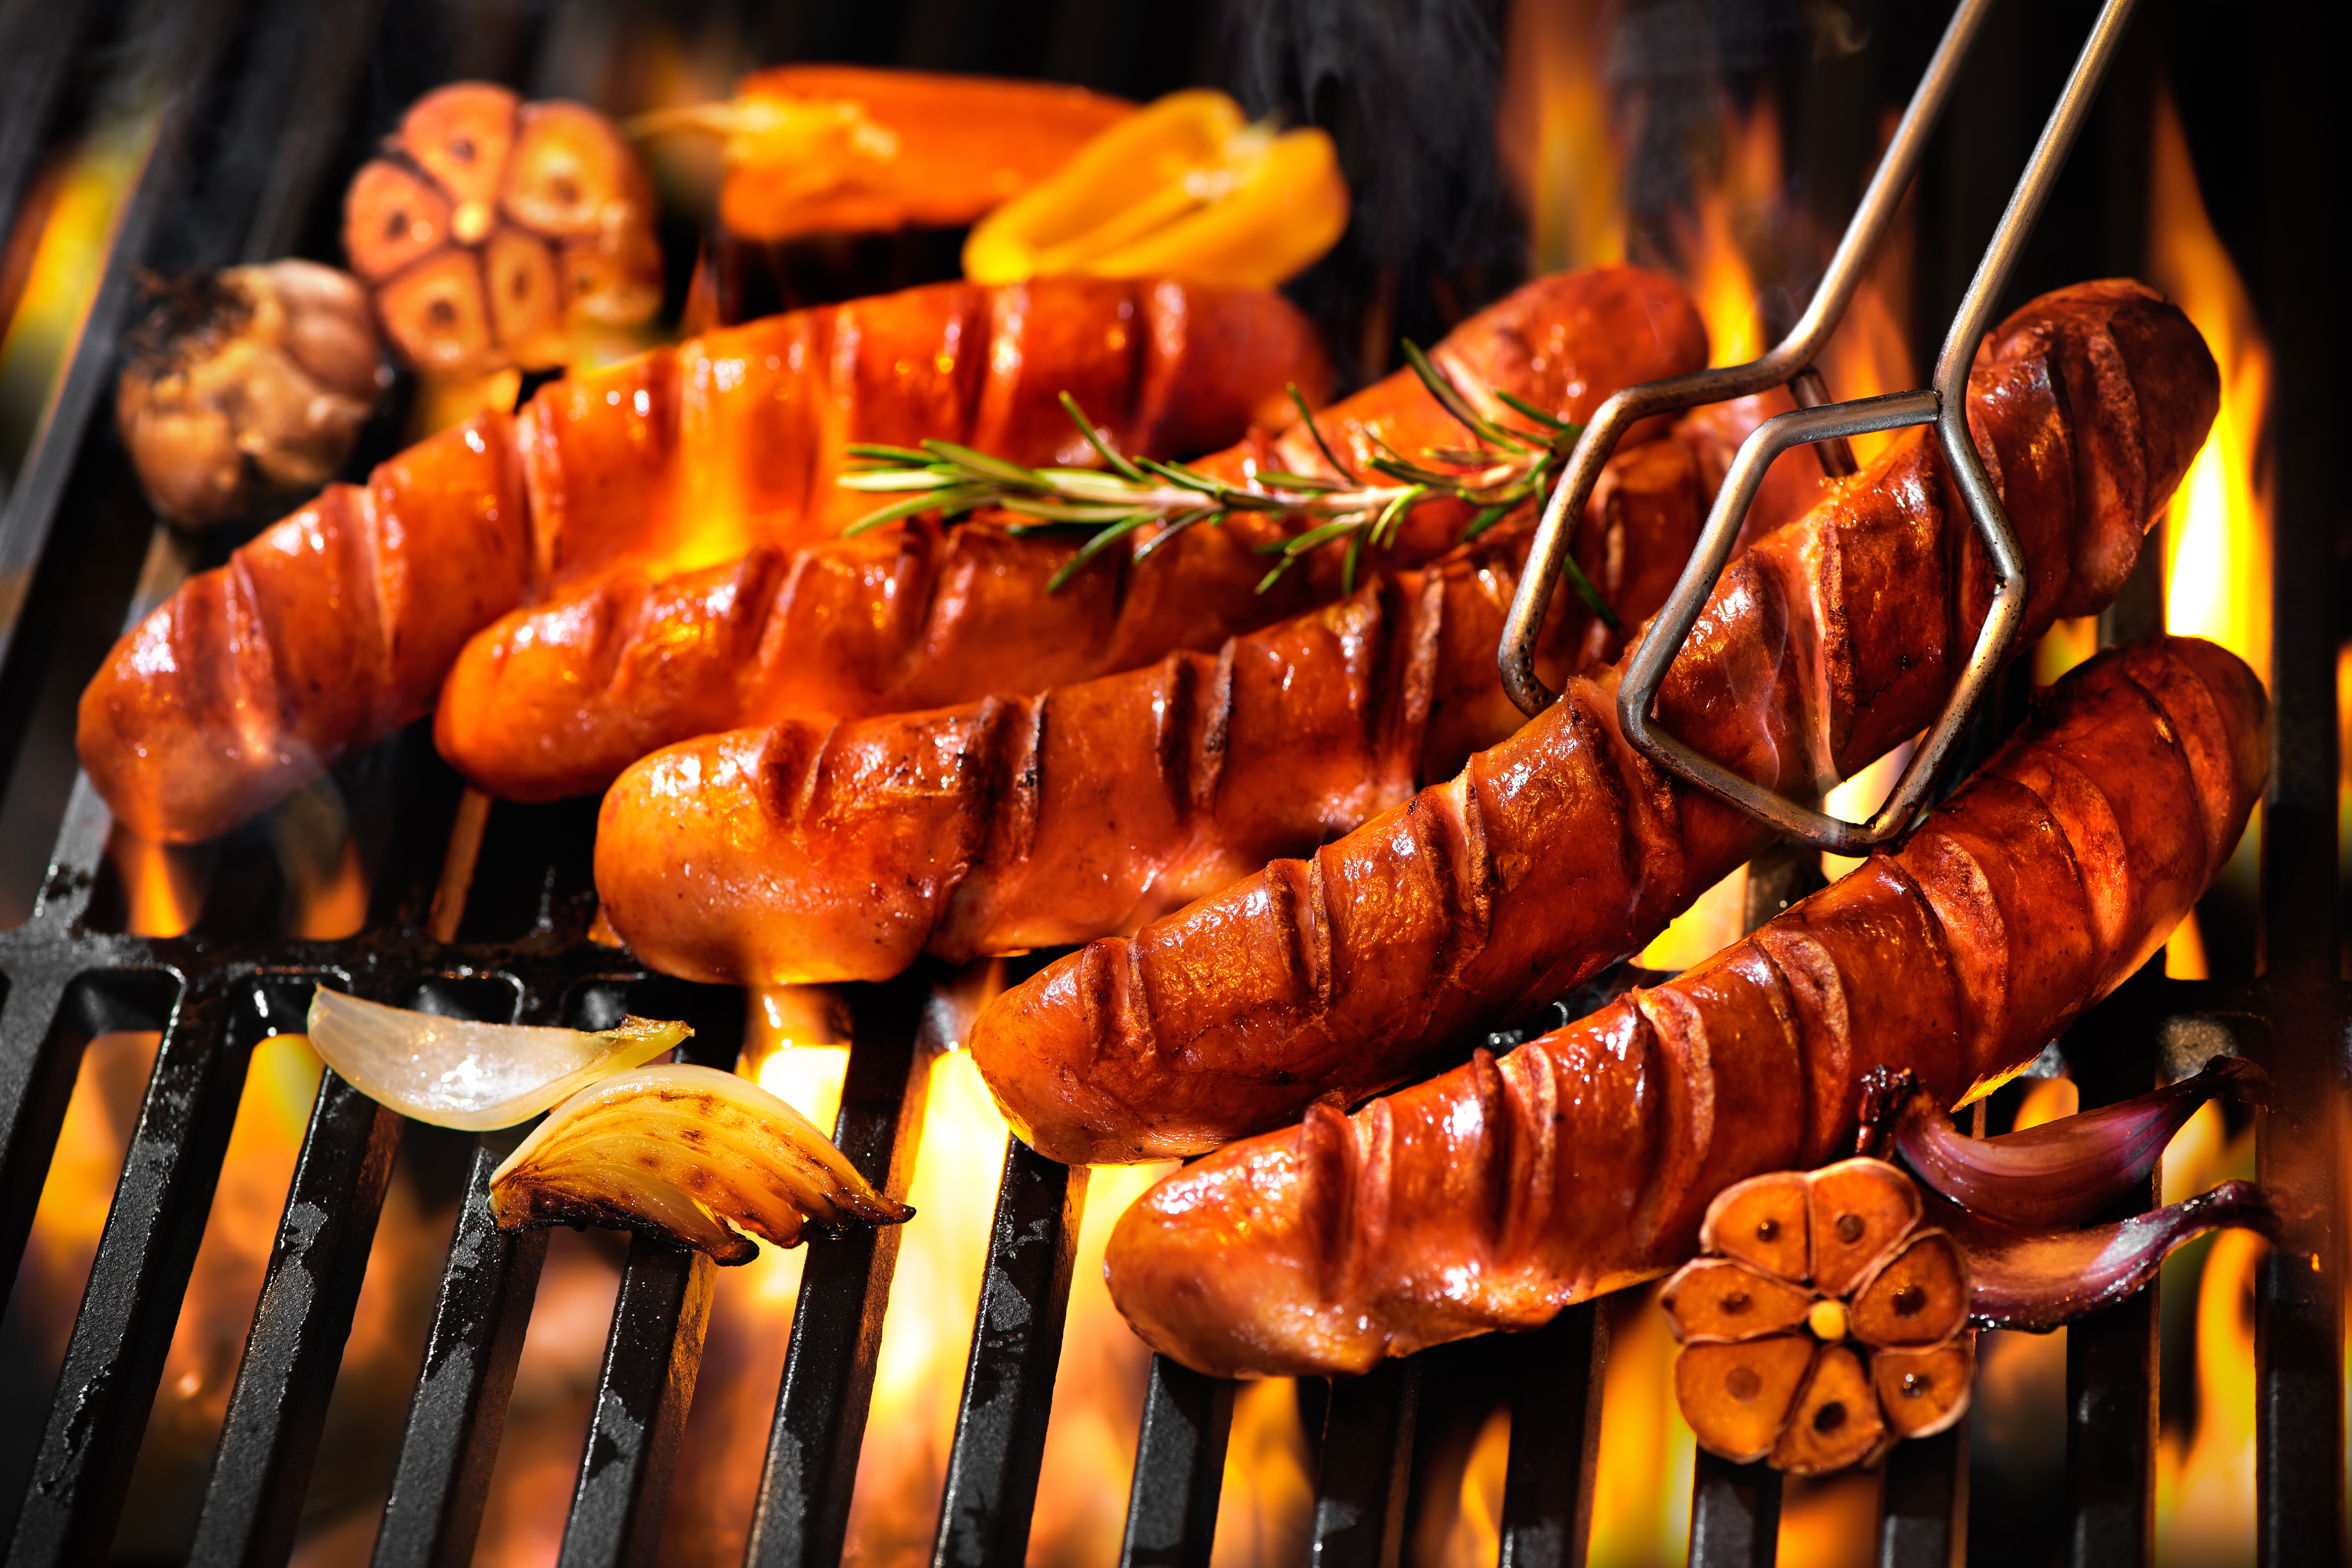 Sausages on the barbecue grill